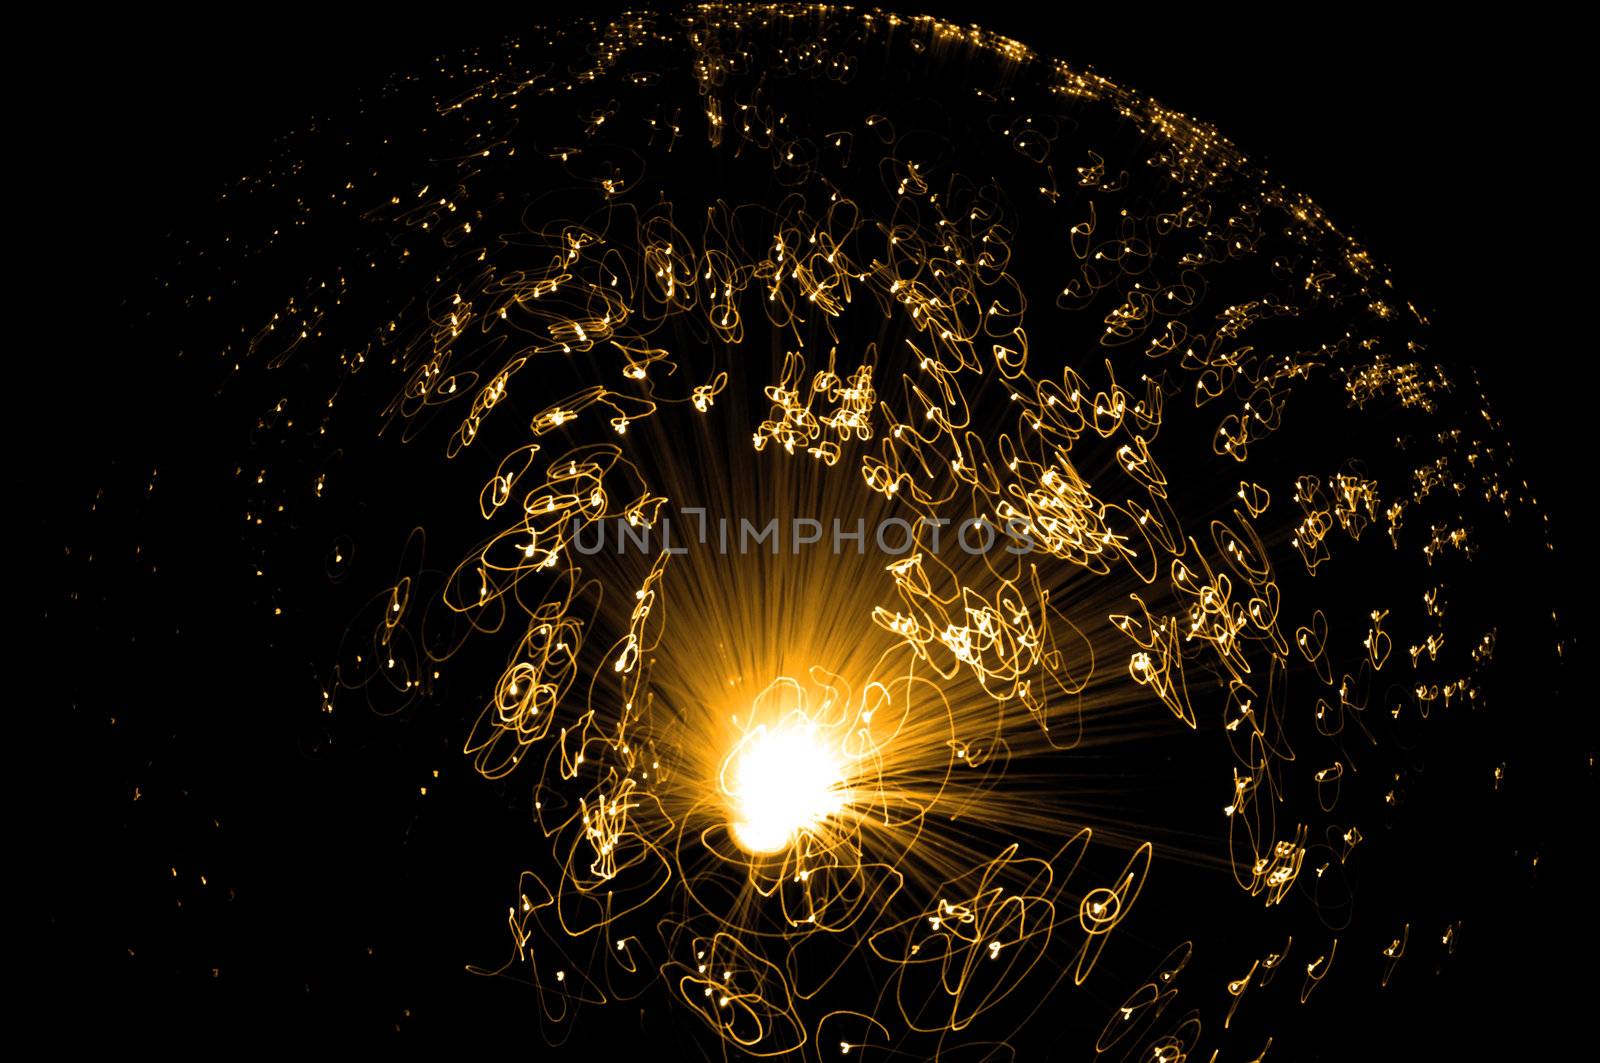 Catching the movement of the ends of many illuminated golden fiber optic strands against a black background.